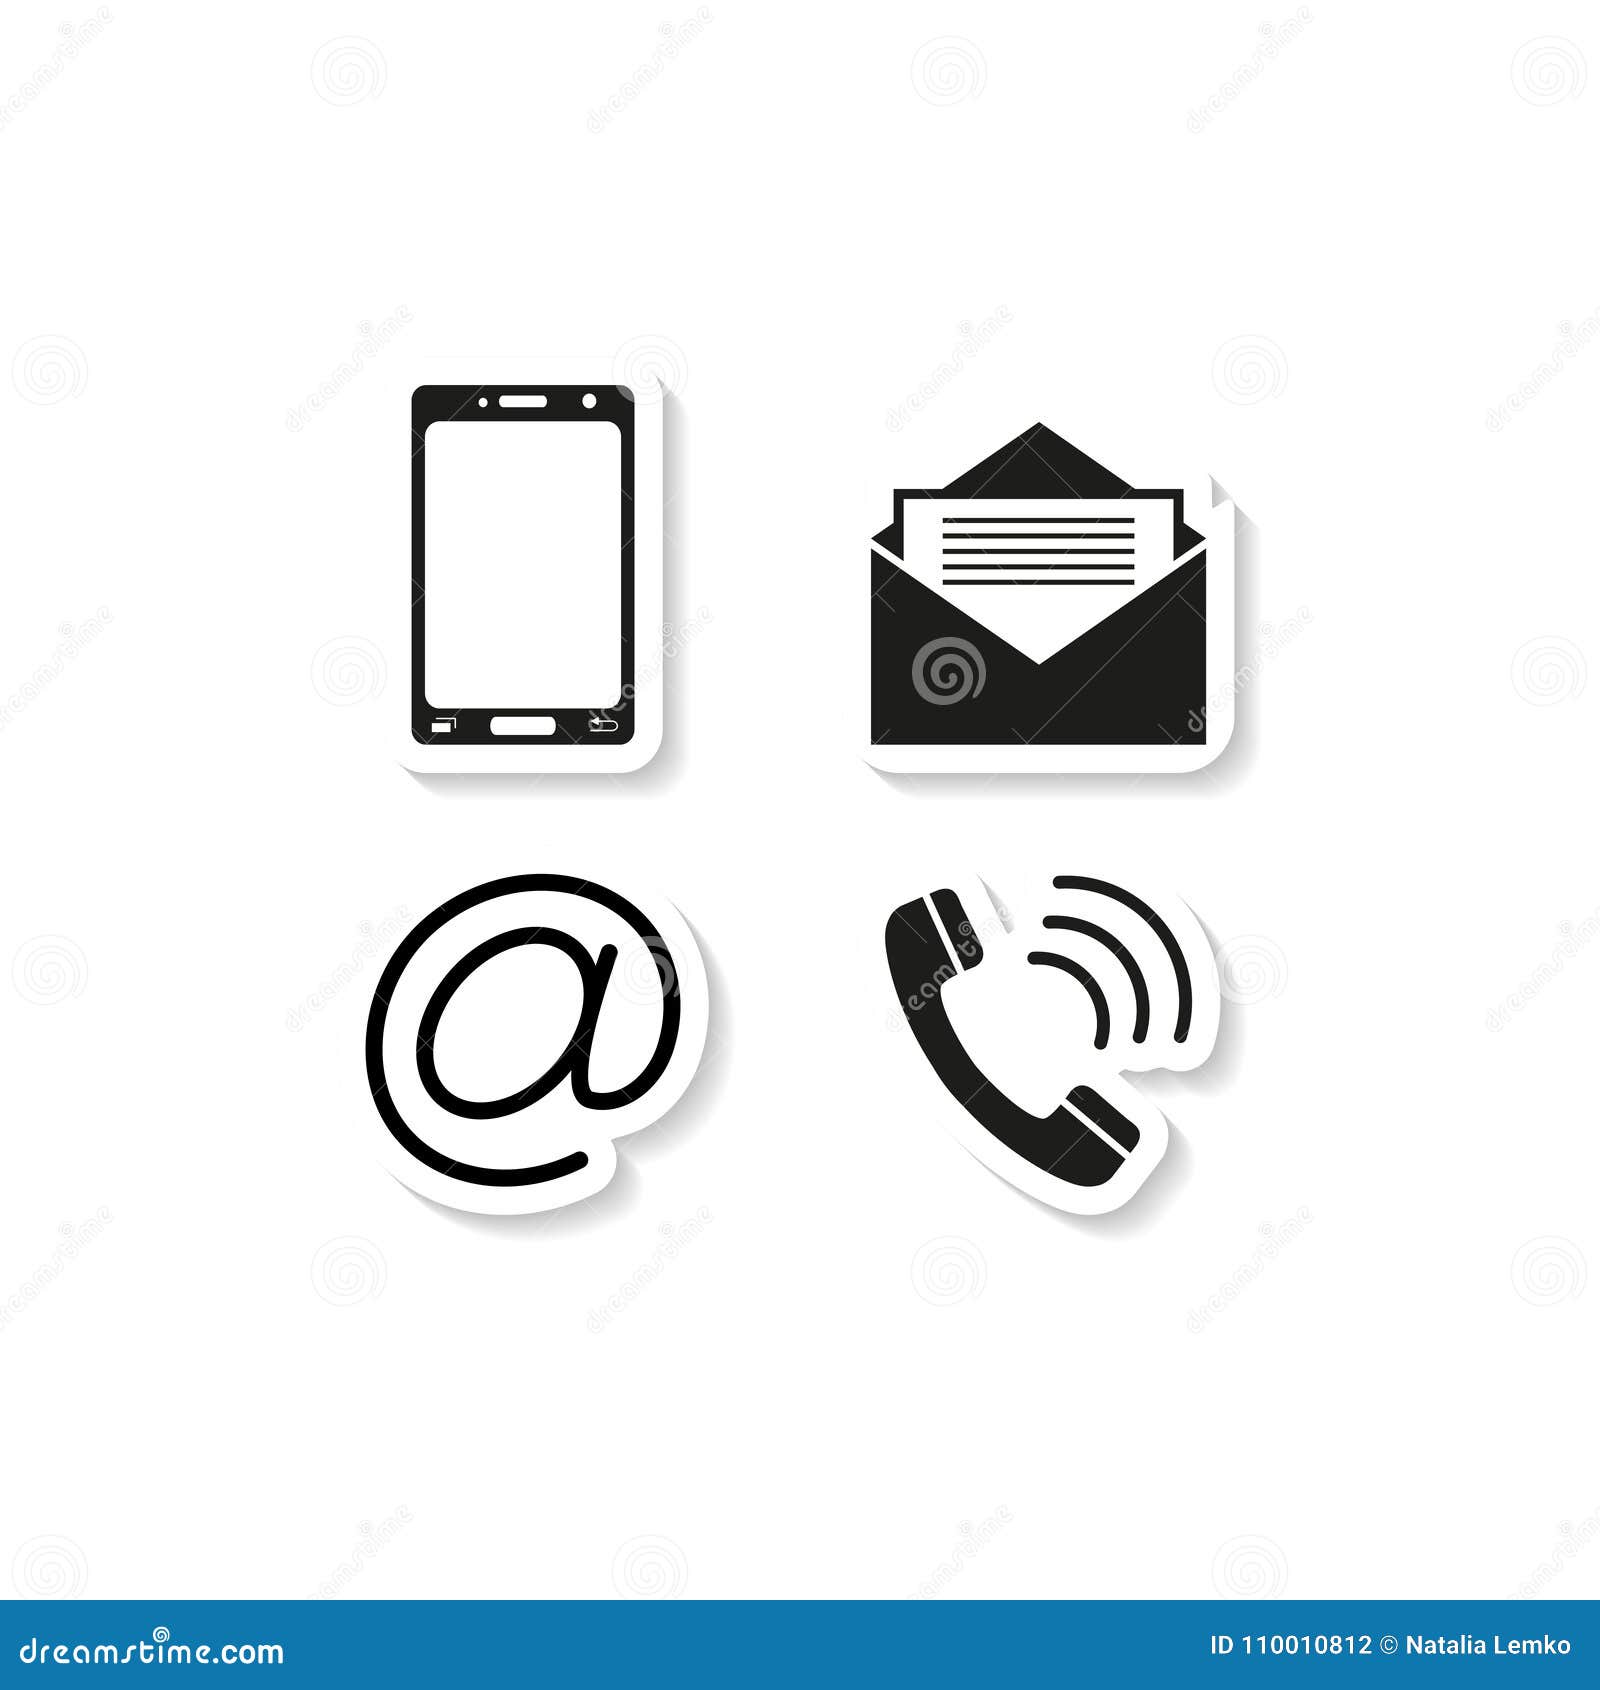 contacts phone sticker icons